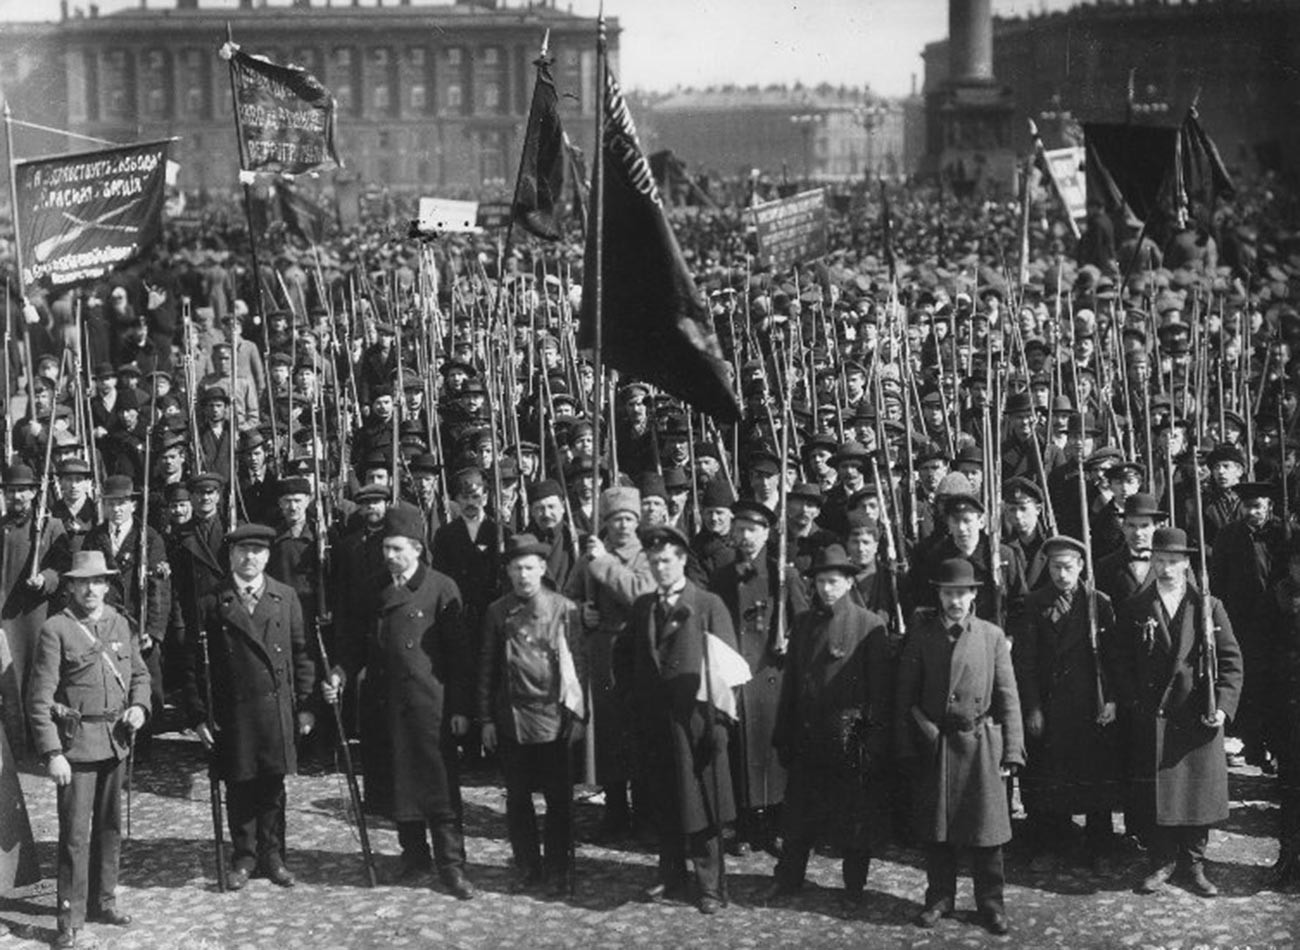 Rallies on the Palace Square 